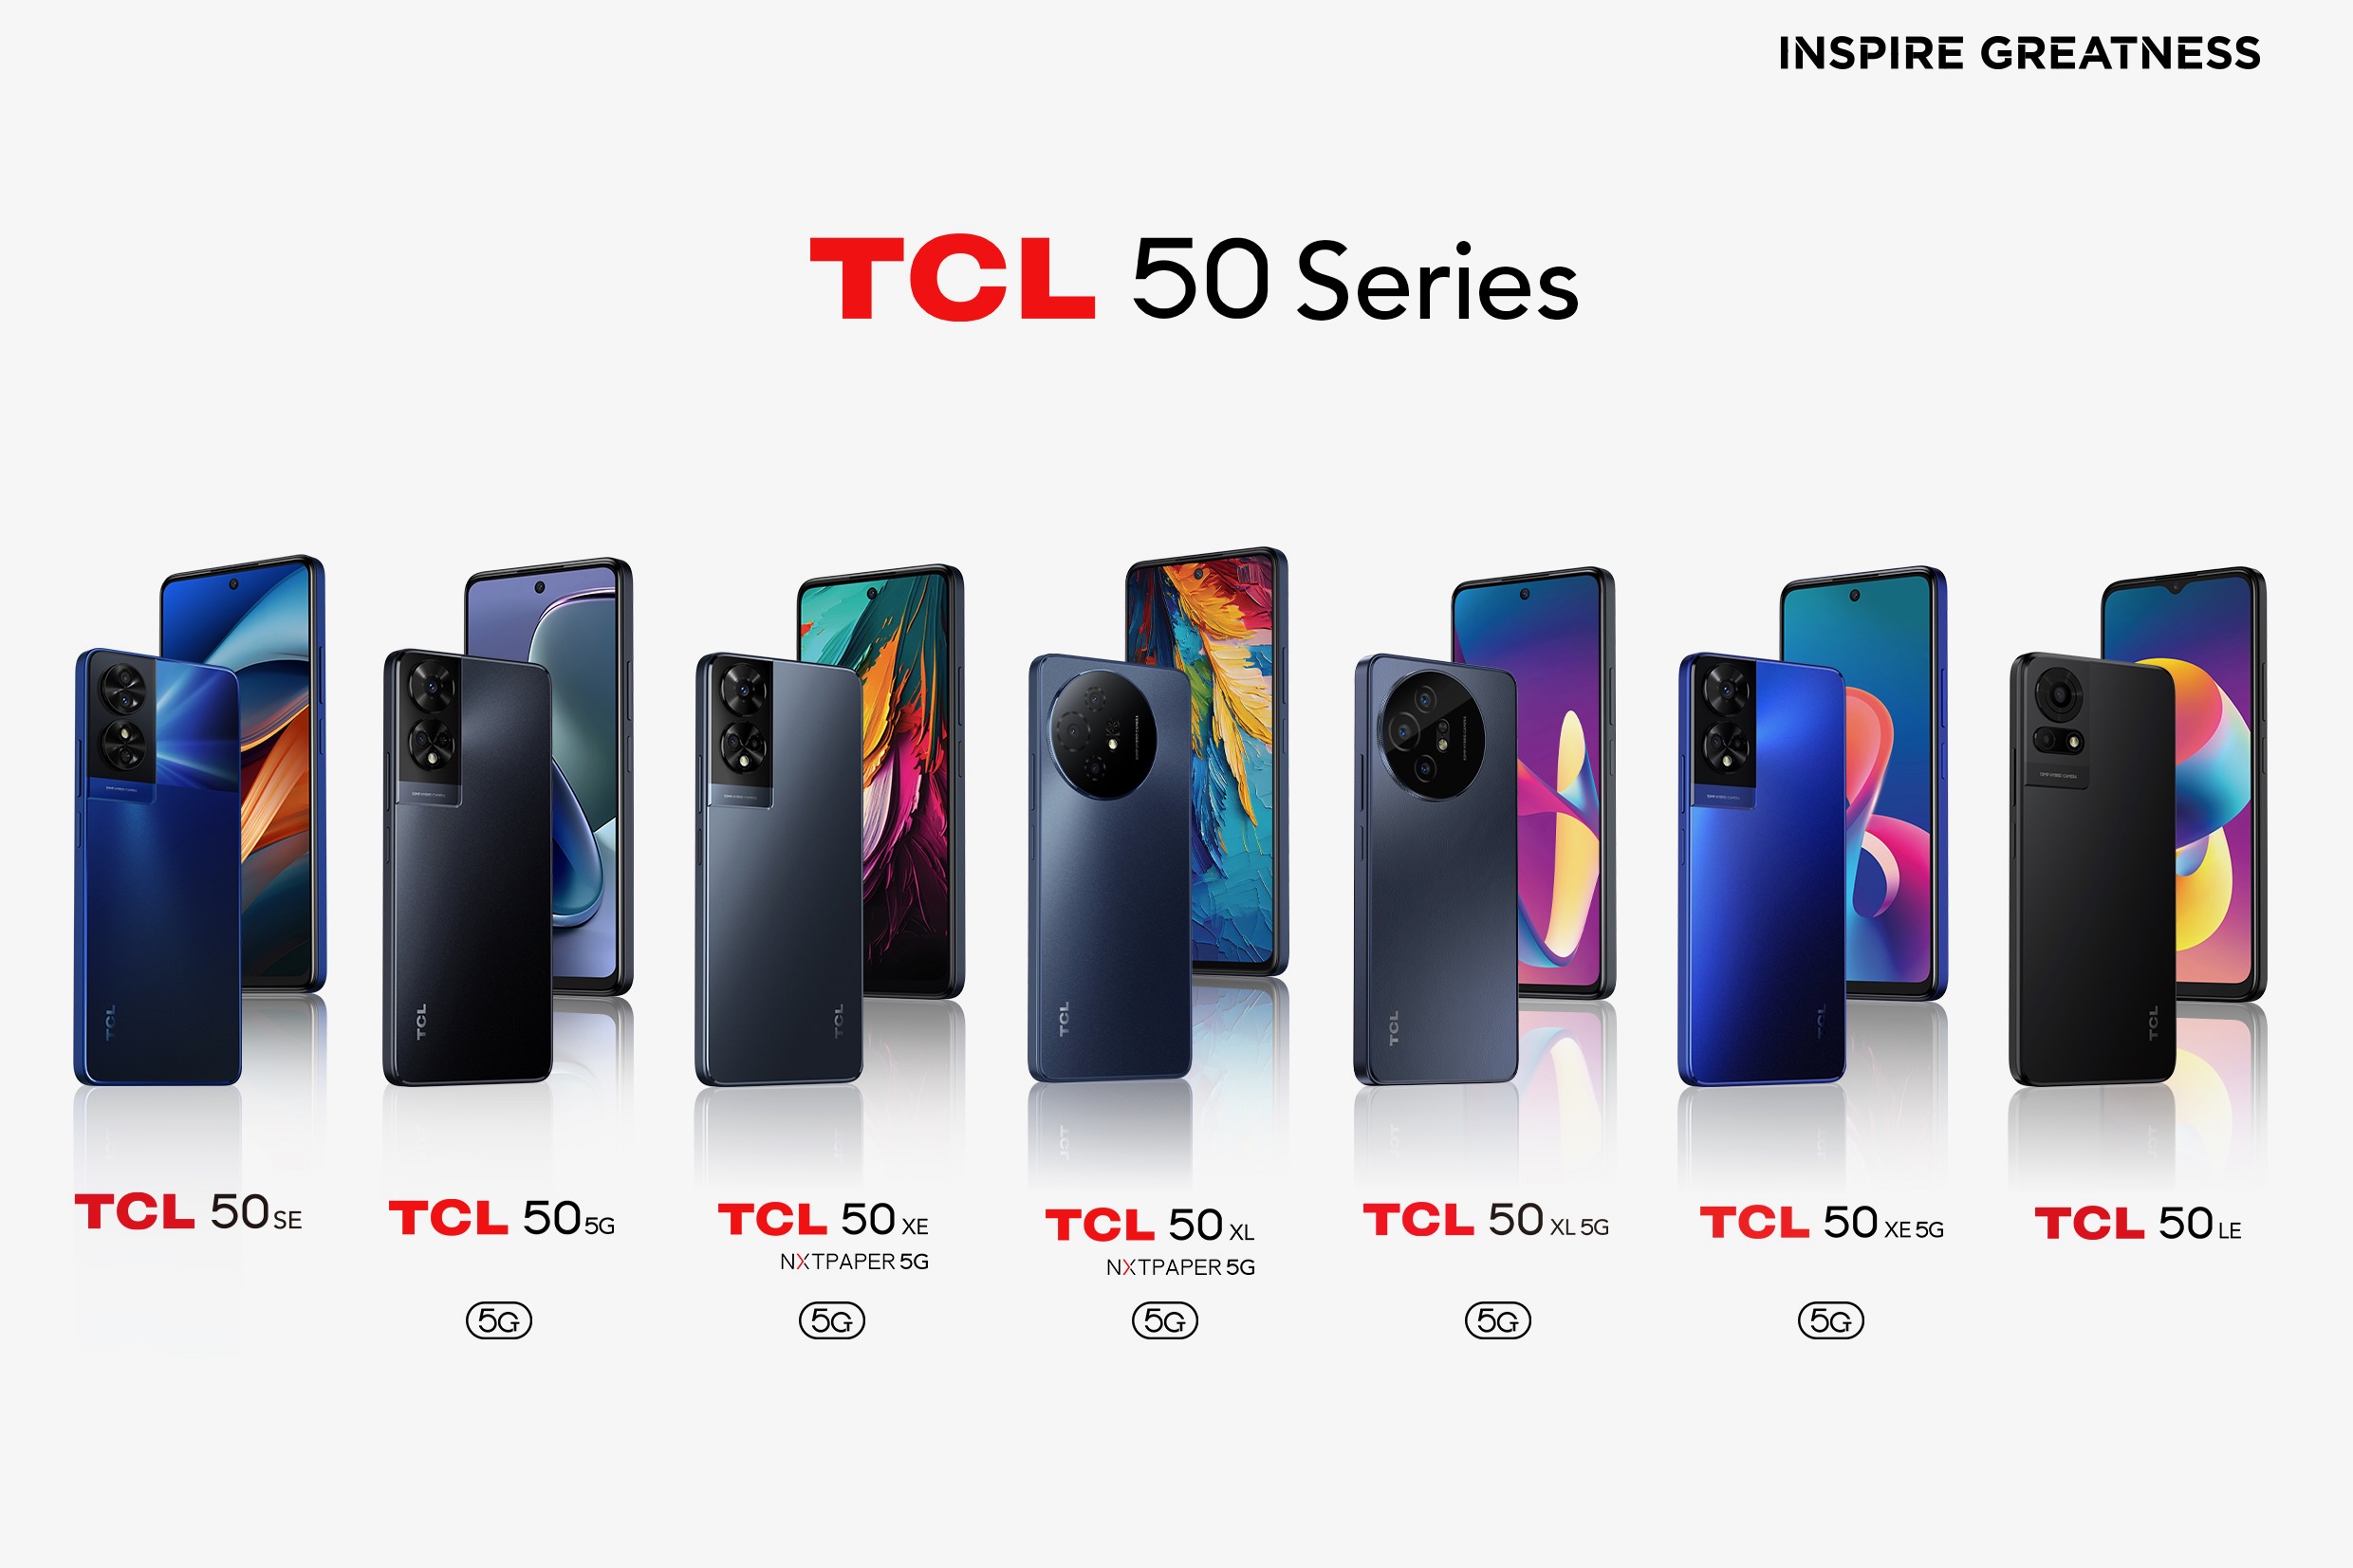 TCL 50 smartphone series.